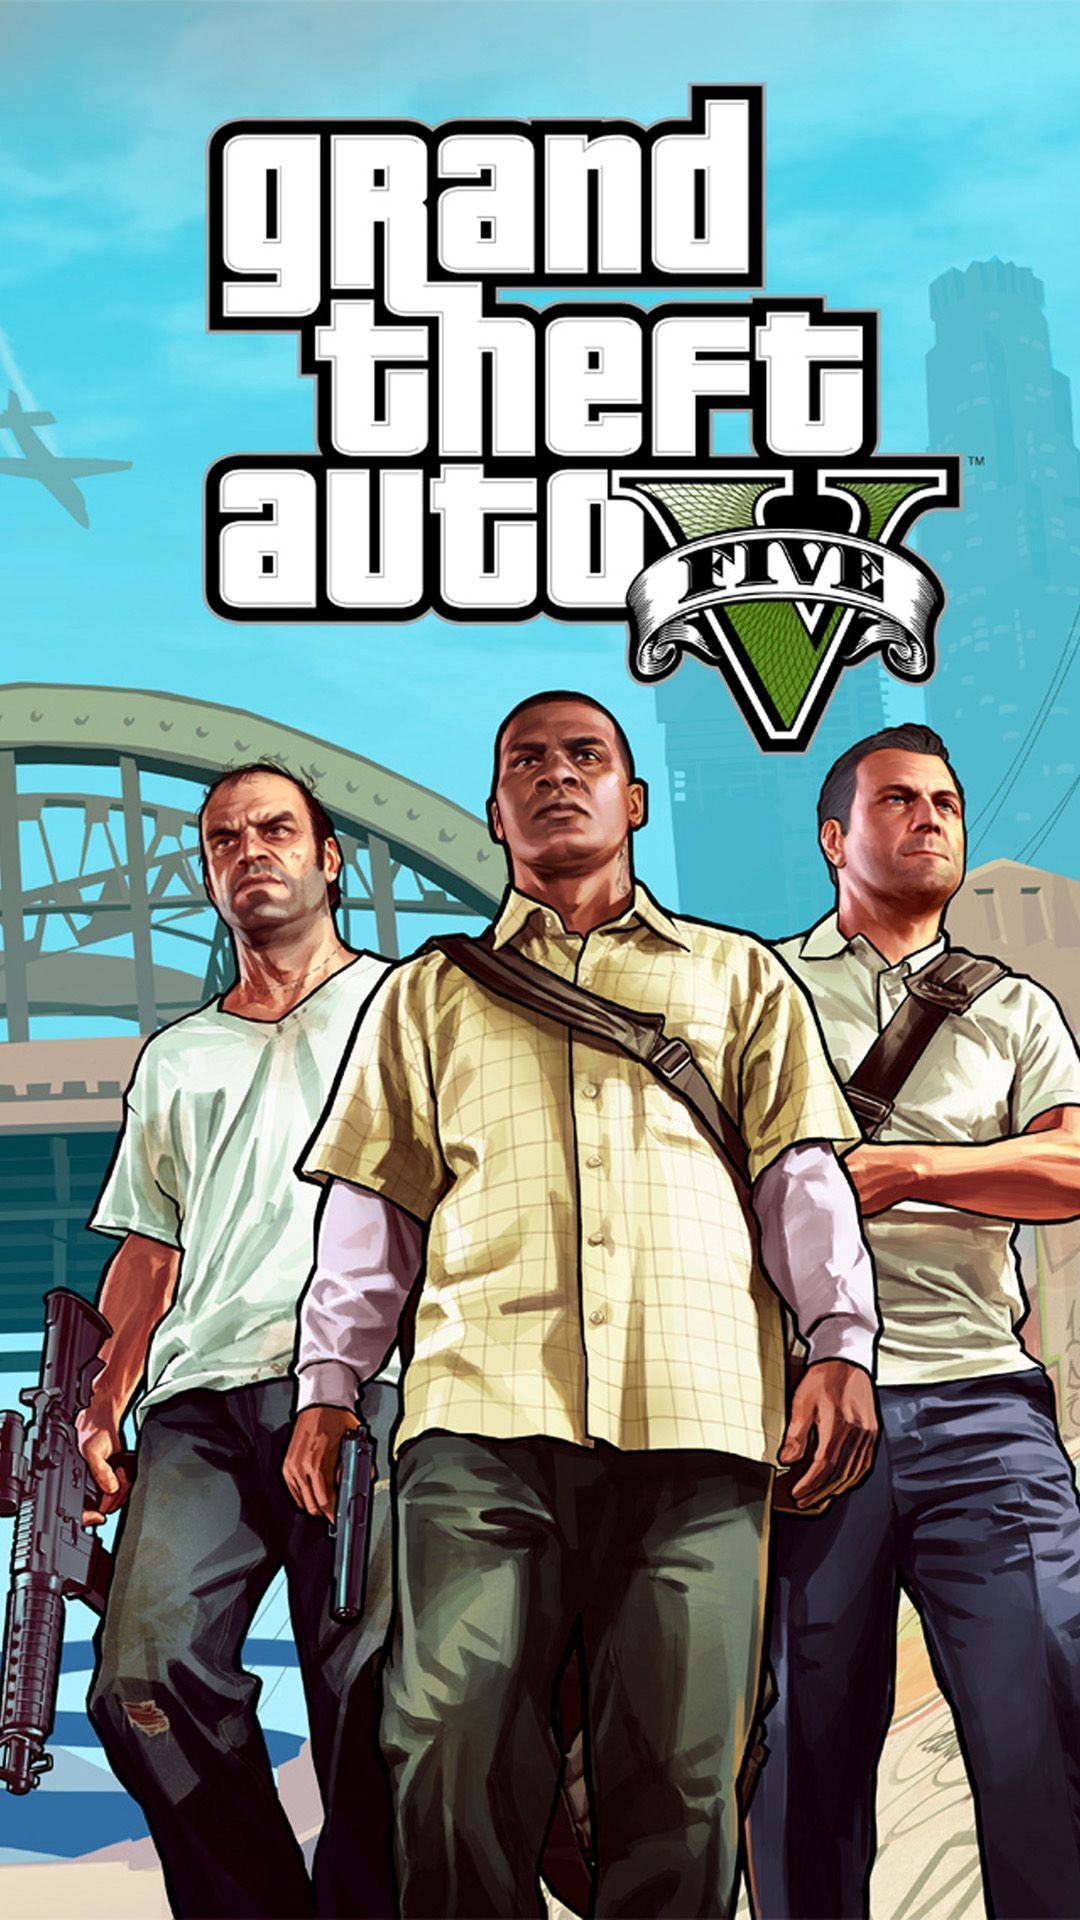 Grand Theft Auto, Best GTA 5 wallpapers, High-speed races, Urban chaos, 1080x1920 Full HD Handy